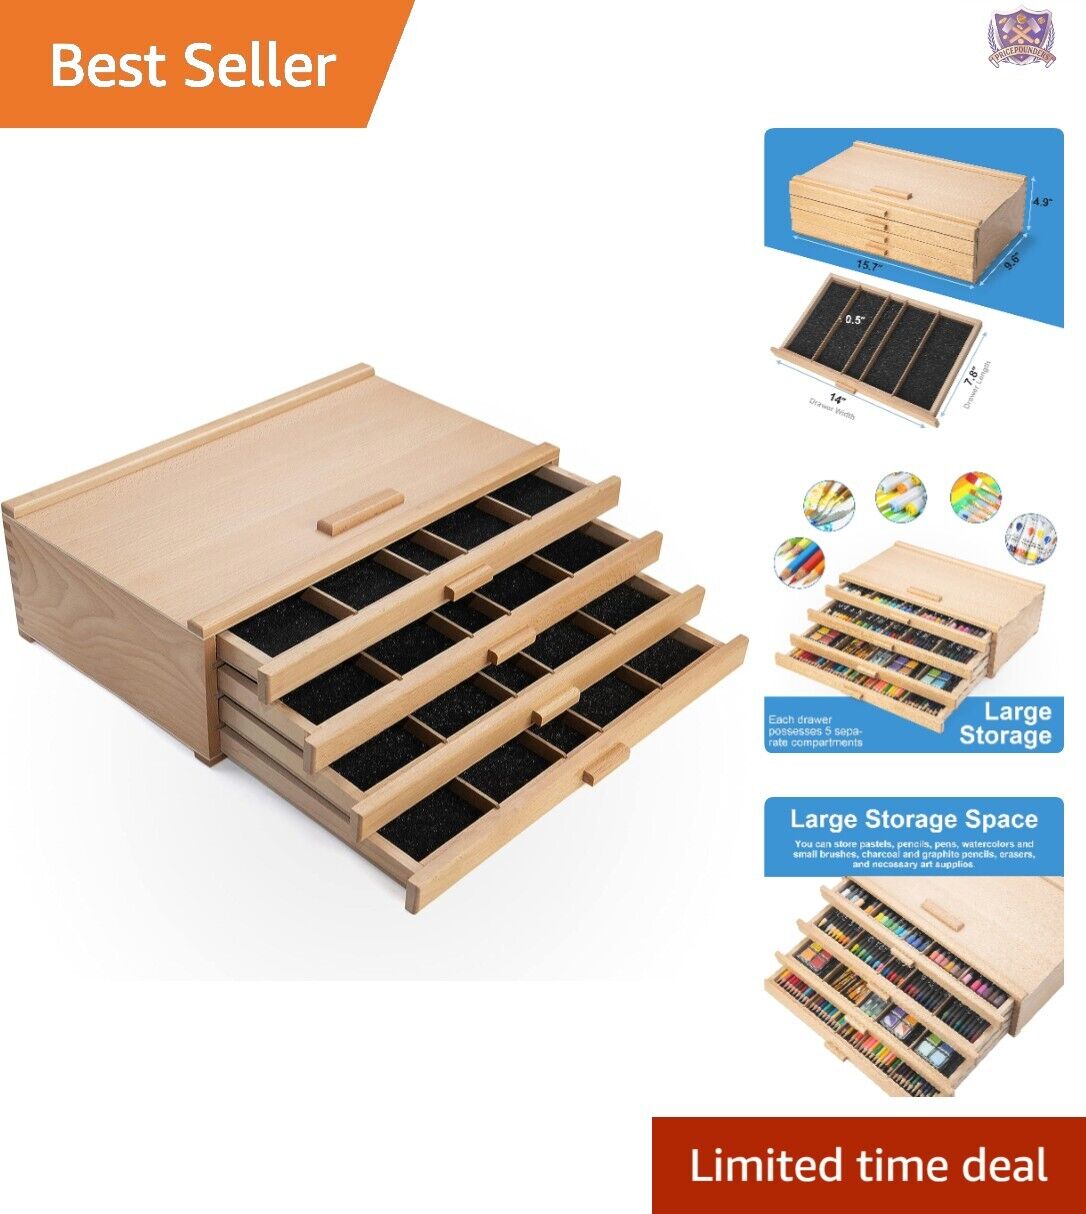 Storage Box Organizer - 4 Drawers - for Pencils, Markers, Brushes, and Tools